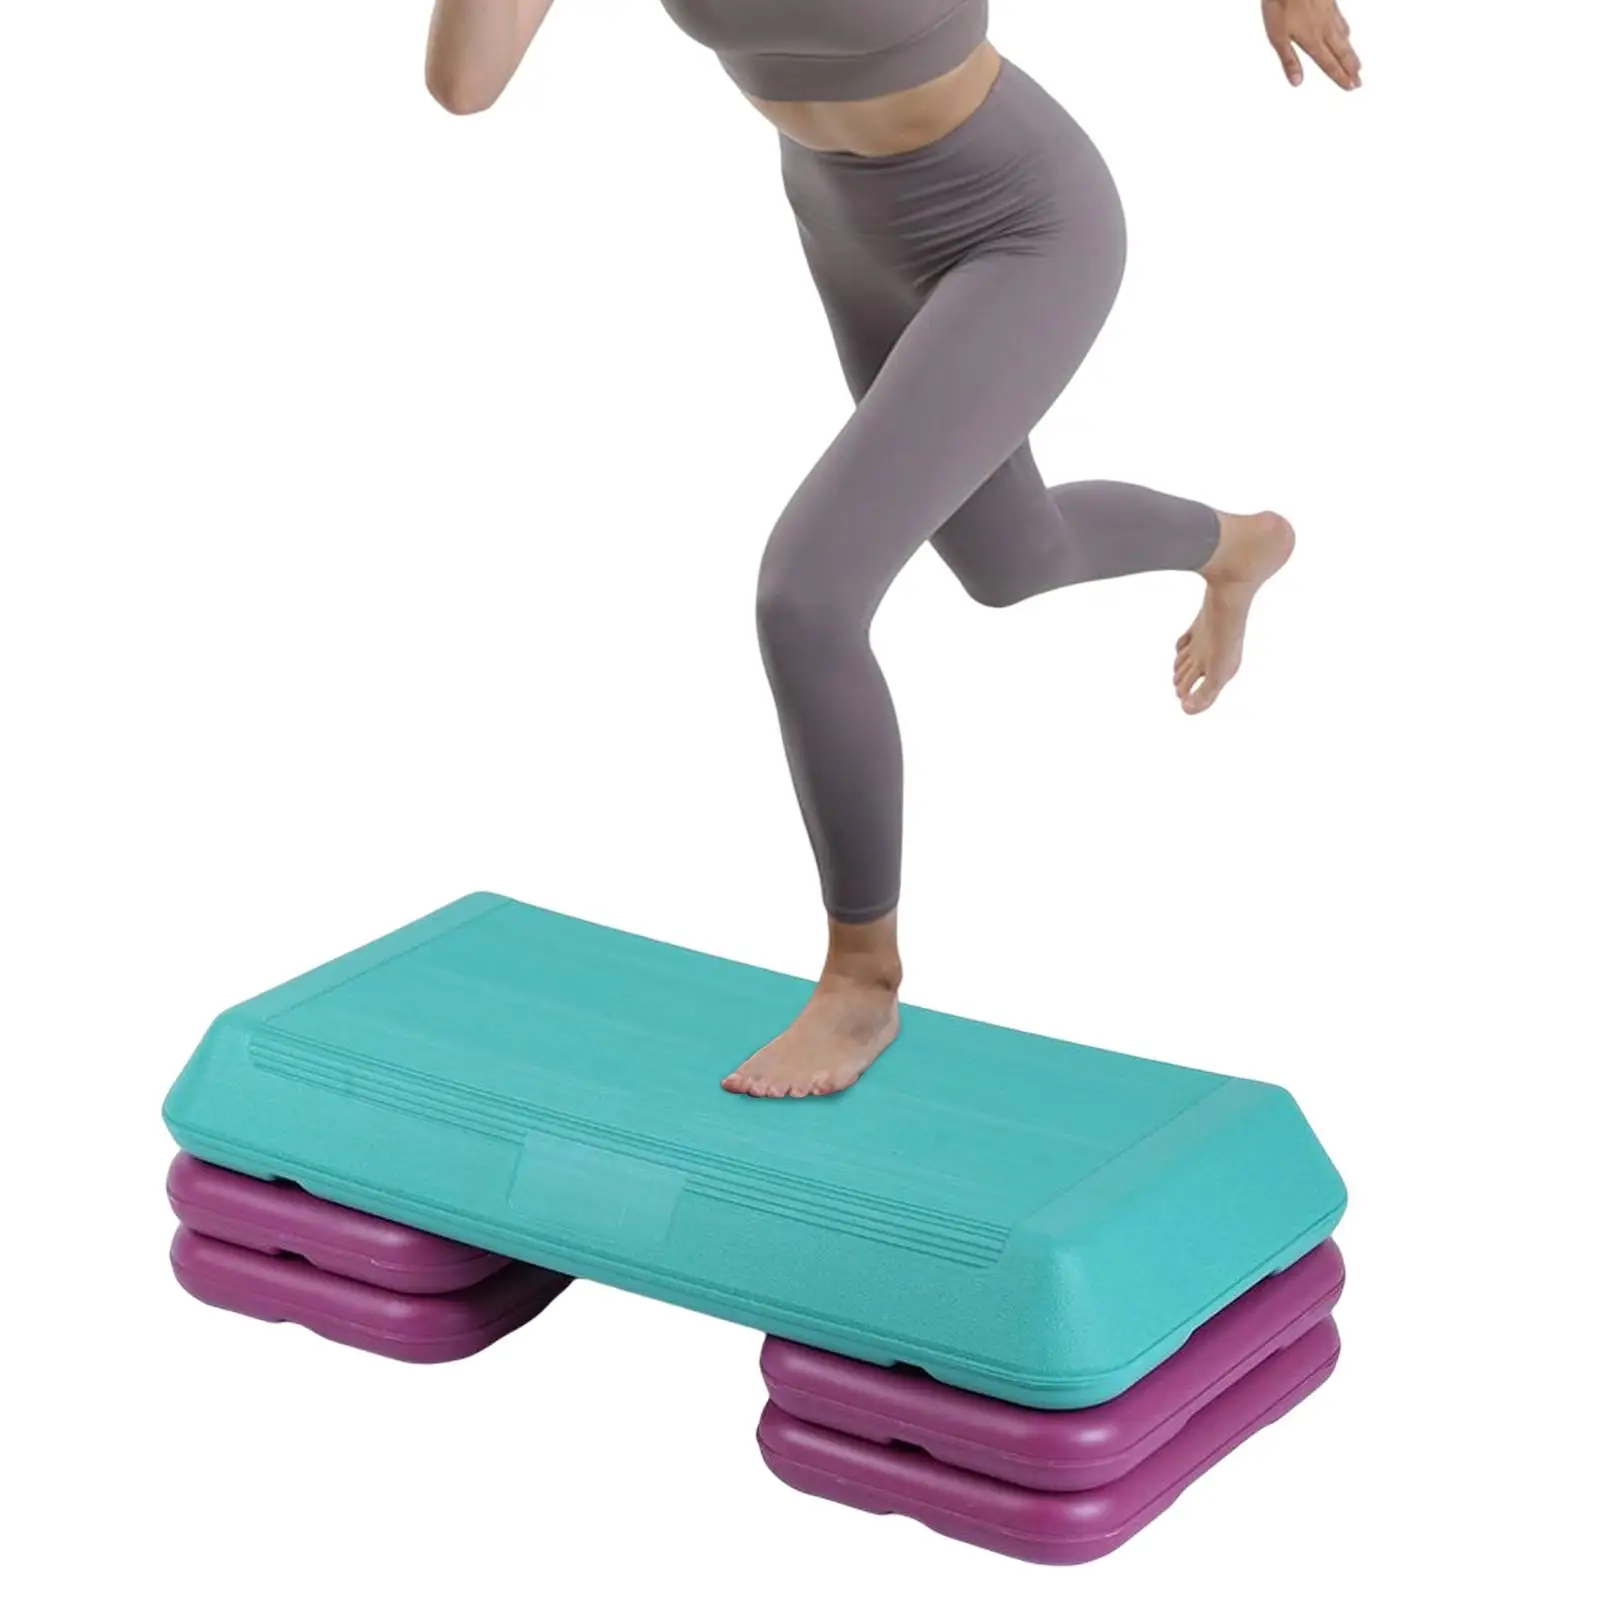 Fitness Pedal Non Slip 3 Adjustable Heavy Duty Aerobic Step Trainer for Children Adults Balancing Home